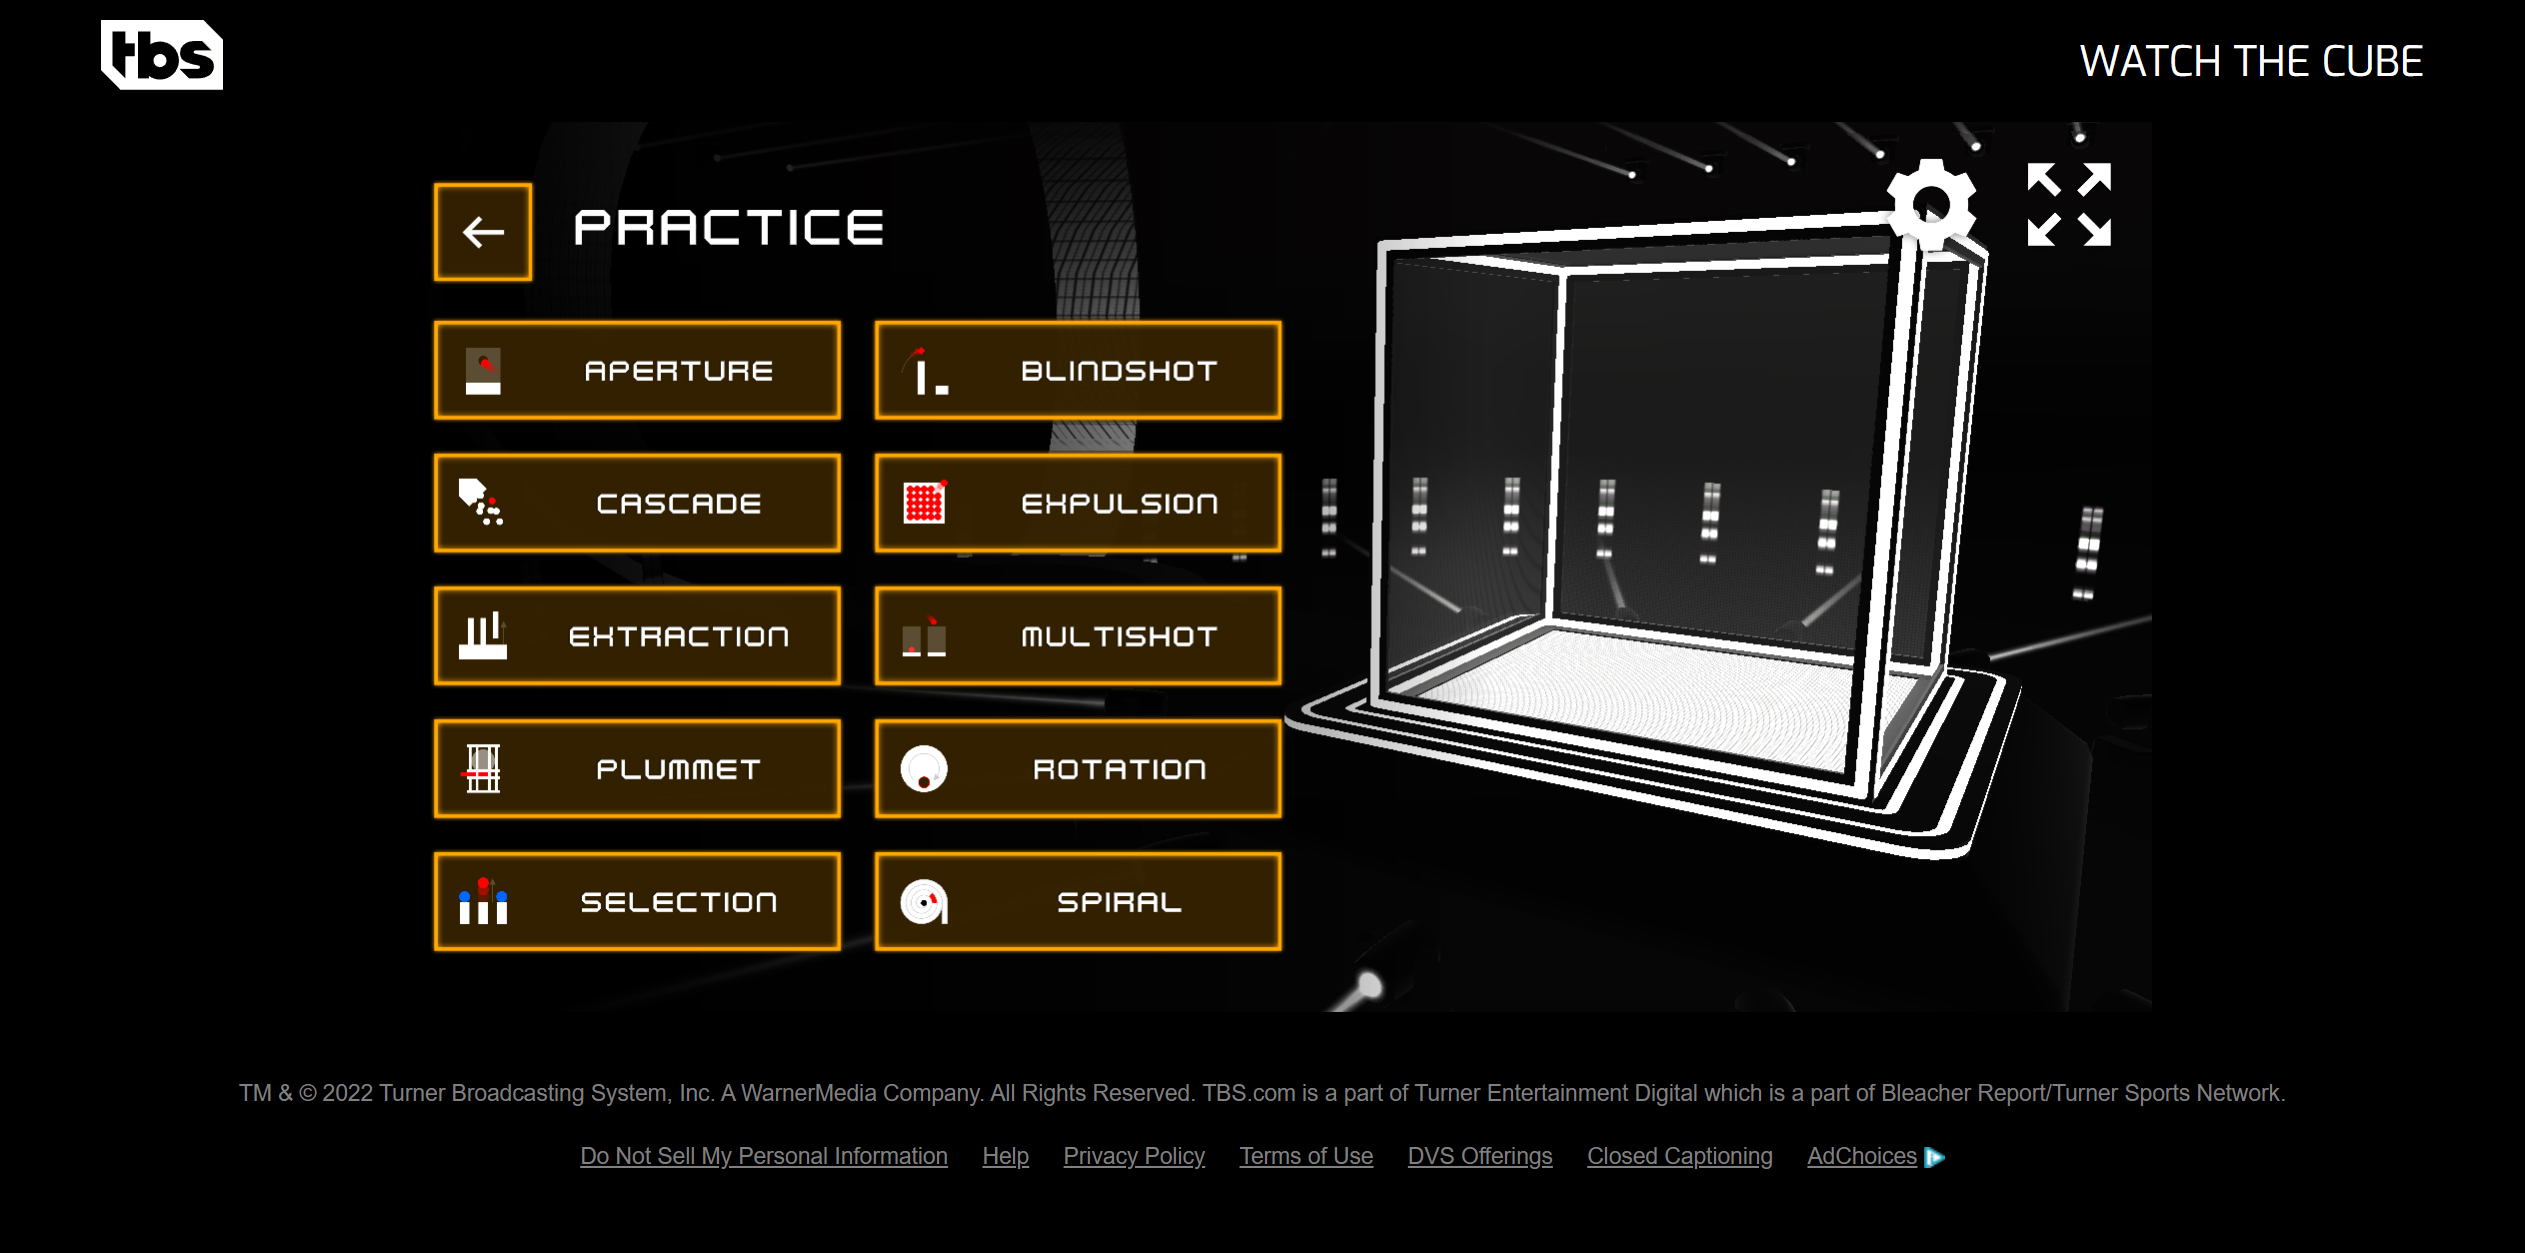 Game selection mode in The Cube web game with 10 different games to choose from.